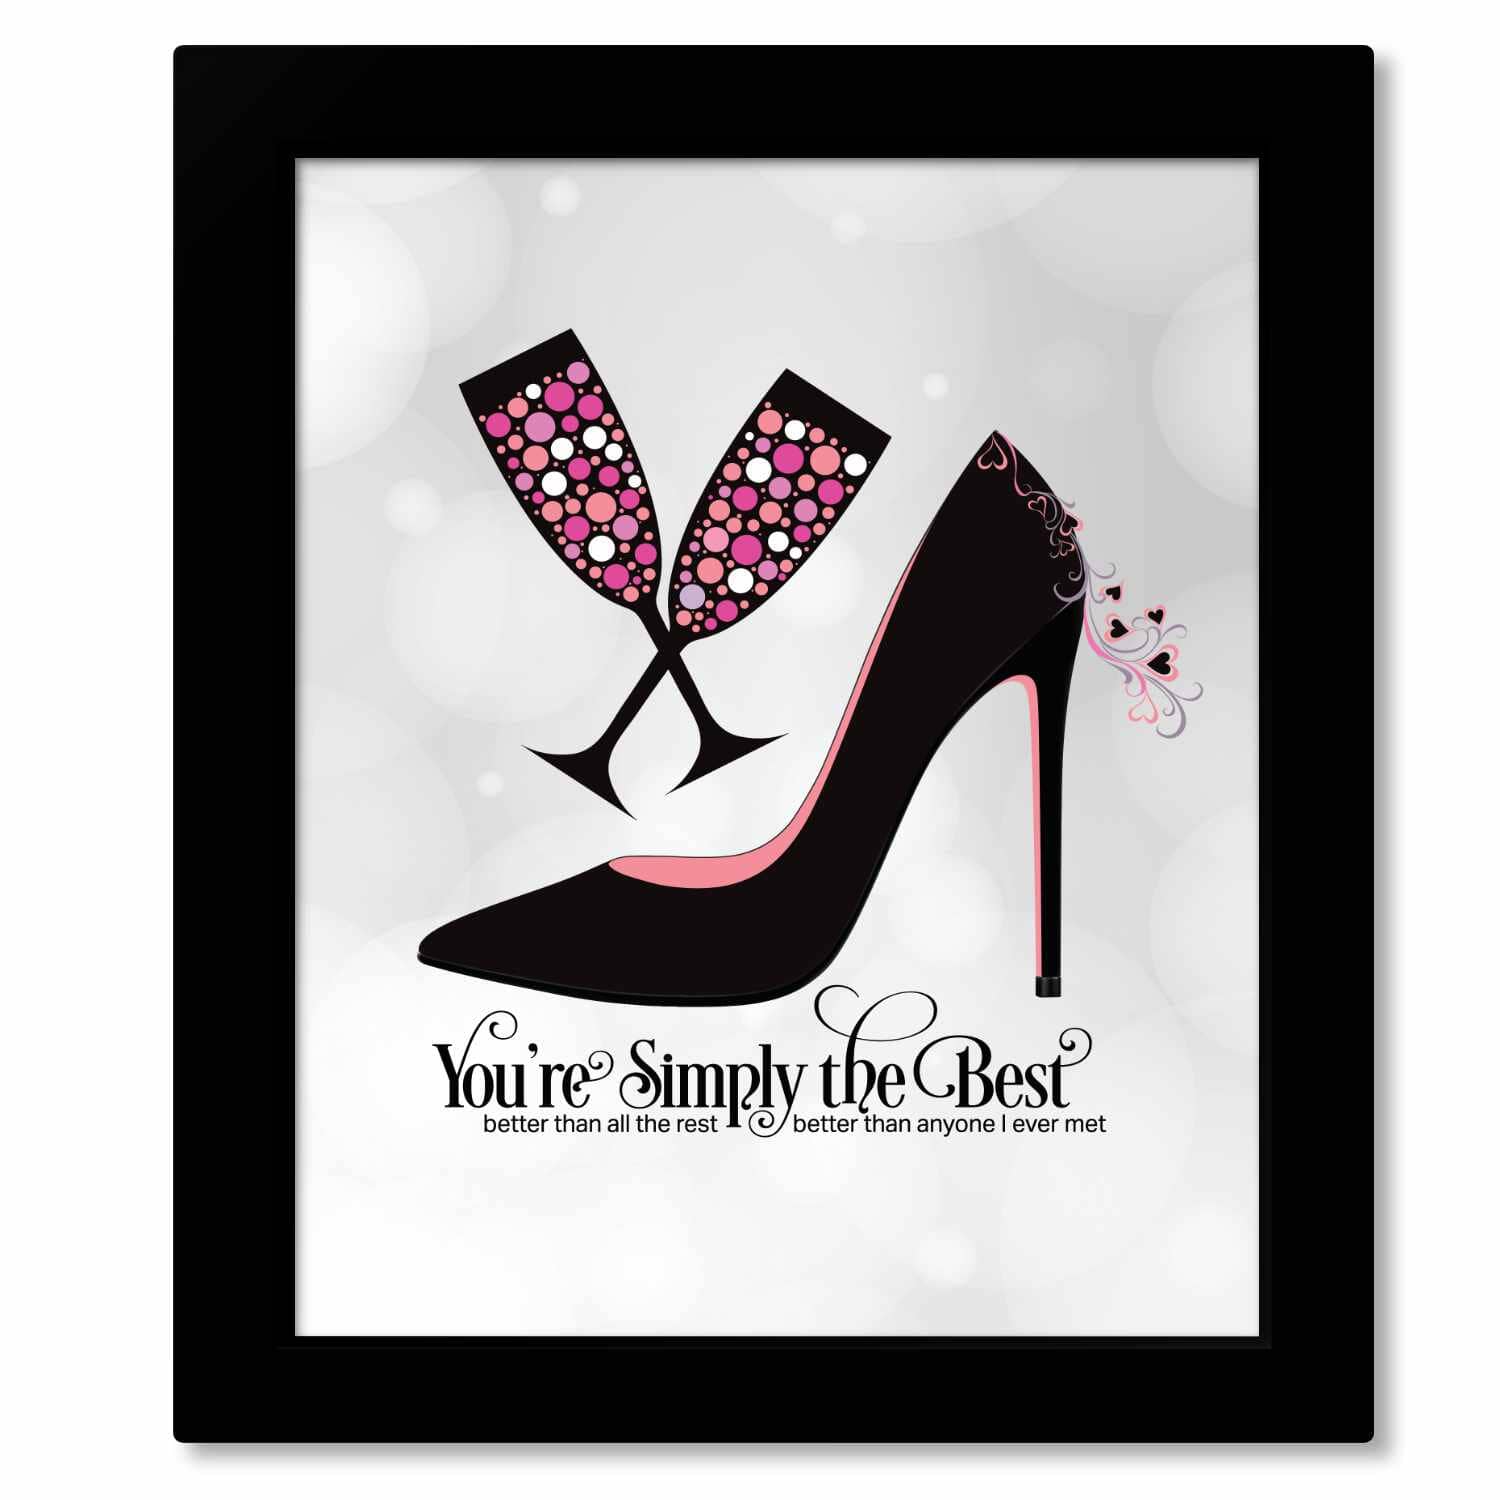 The Best by Tina Turner - 80s Song Lyric Wall Print Poster Song Lyrics Art Song Lyrics Art 8x10 Framed Print (No Mat) 